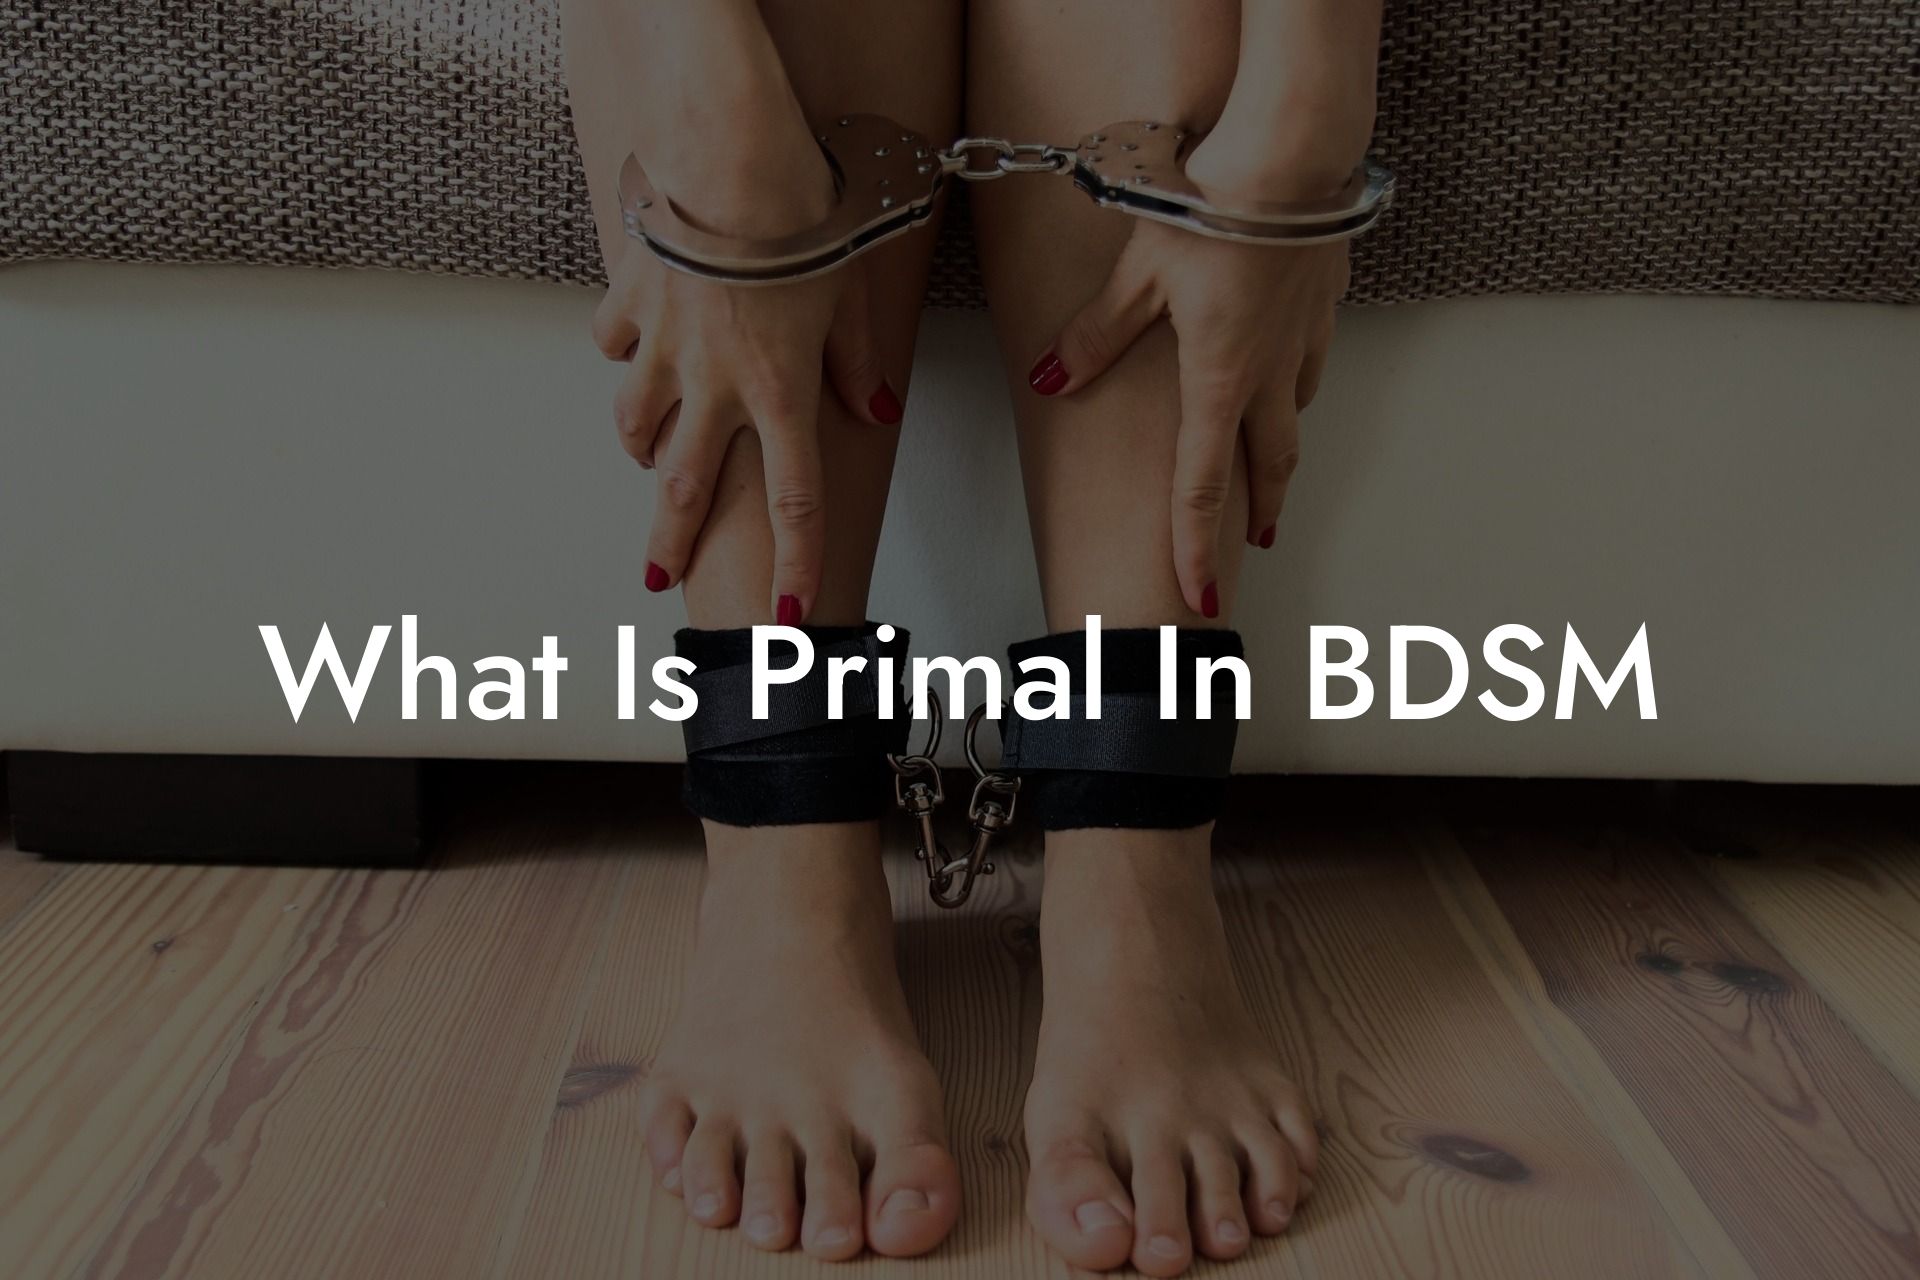 What Is Primal In BDSM